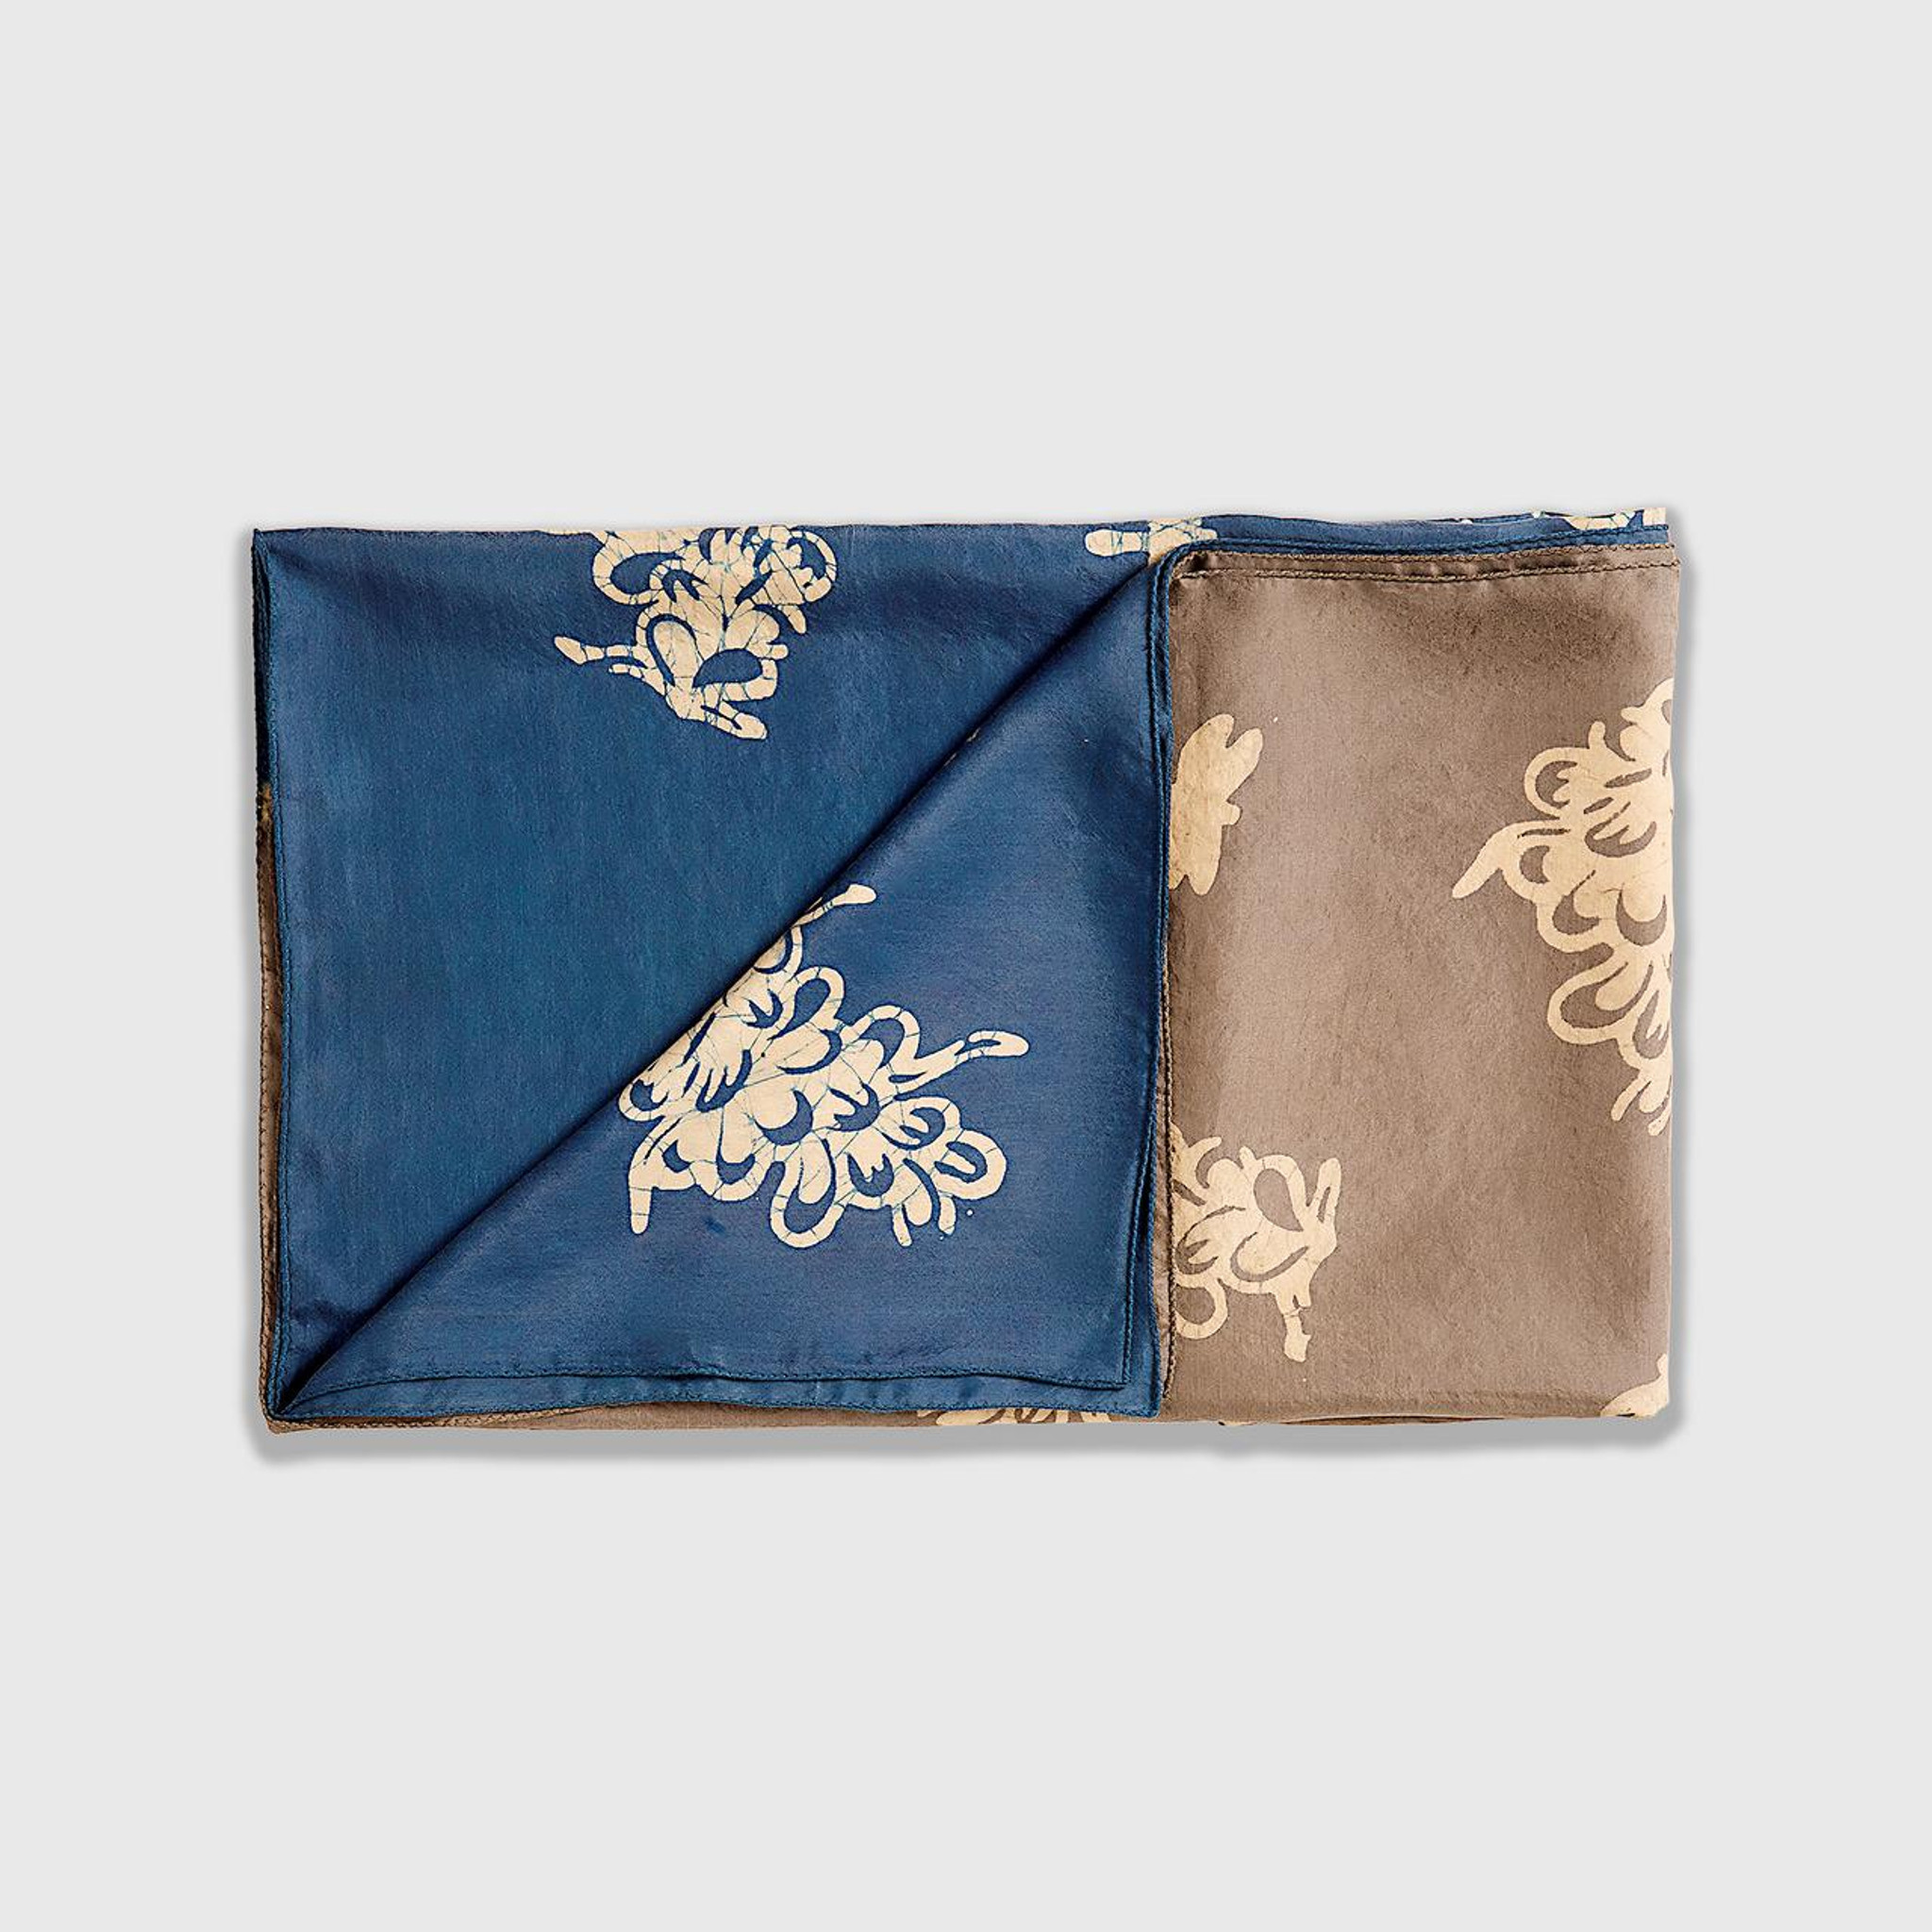 Oraa Black Silk Scarf, 44″ x 44″ by Variously, hand-dyed silk scarves | available in the elk & HAMMER Gallery